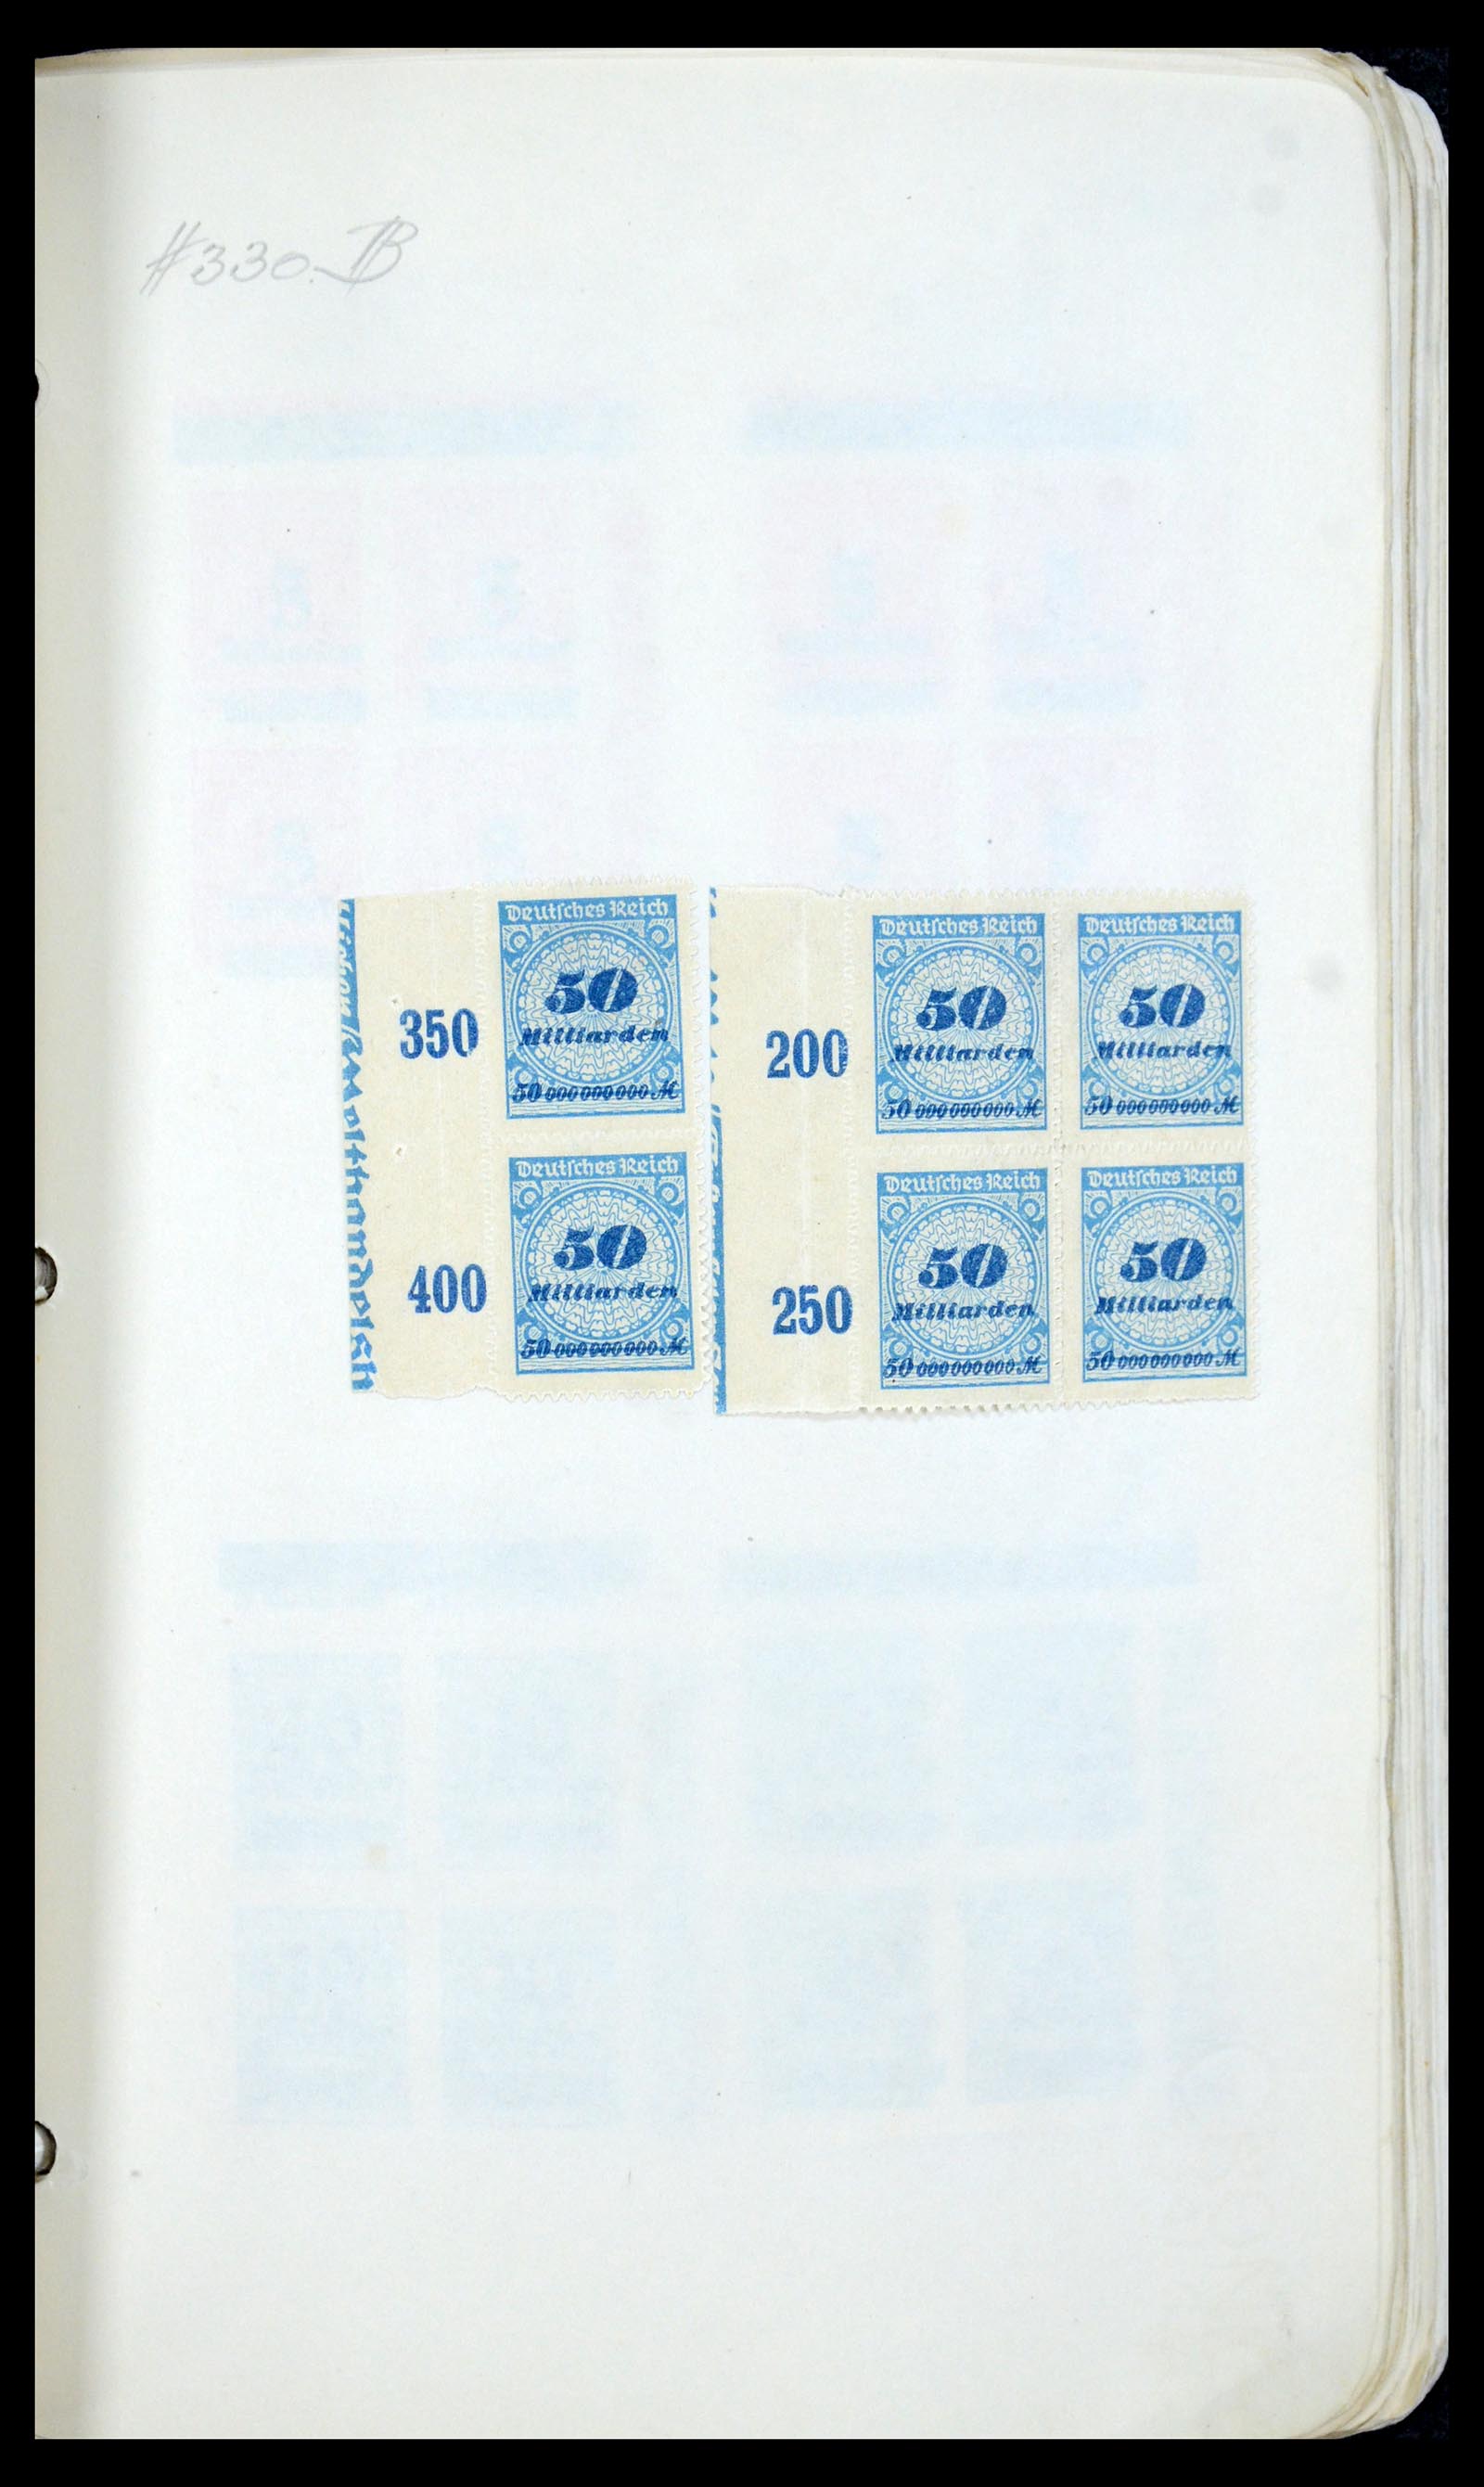 35565 038 - Stamp Collection 35565 German Reich infla 1919-1923.